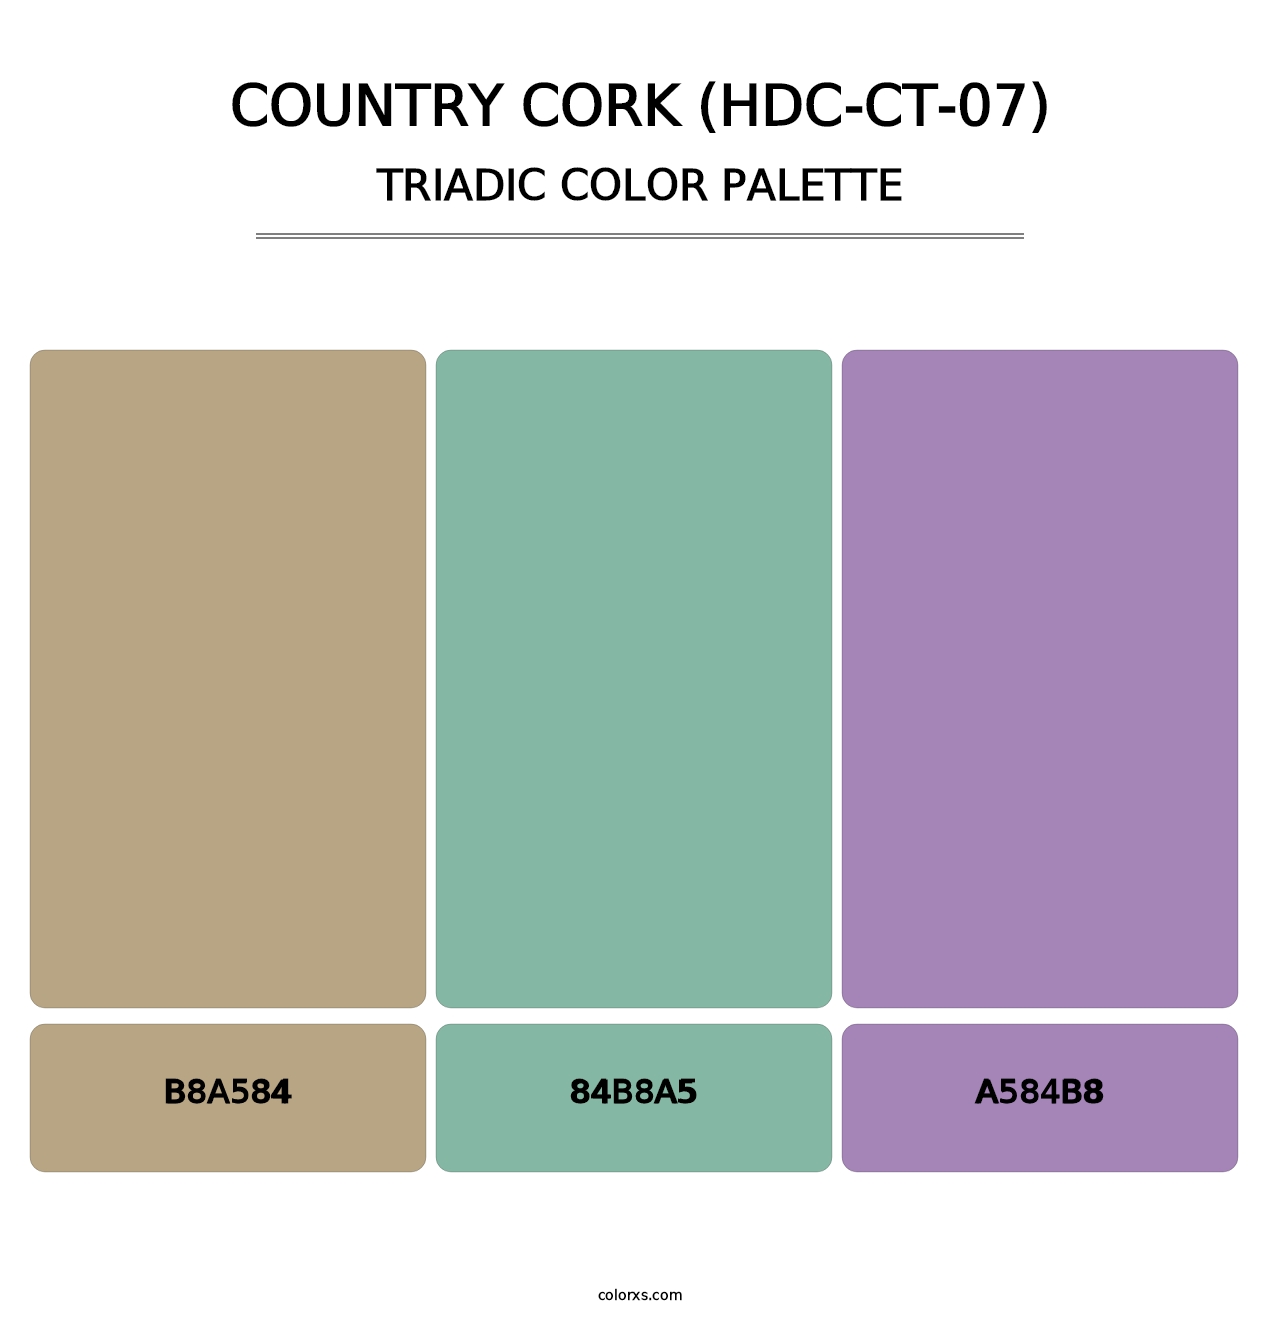 Country Cork (HDC-CT-07) - Triadic Color Palette